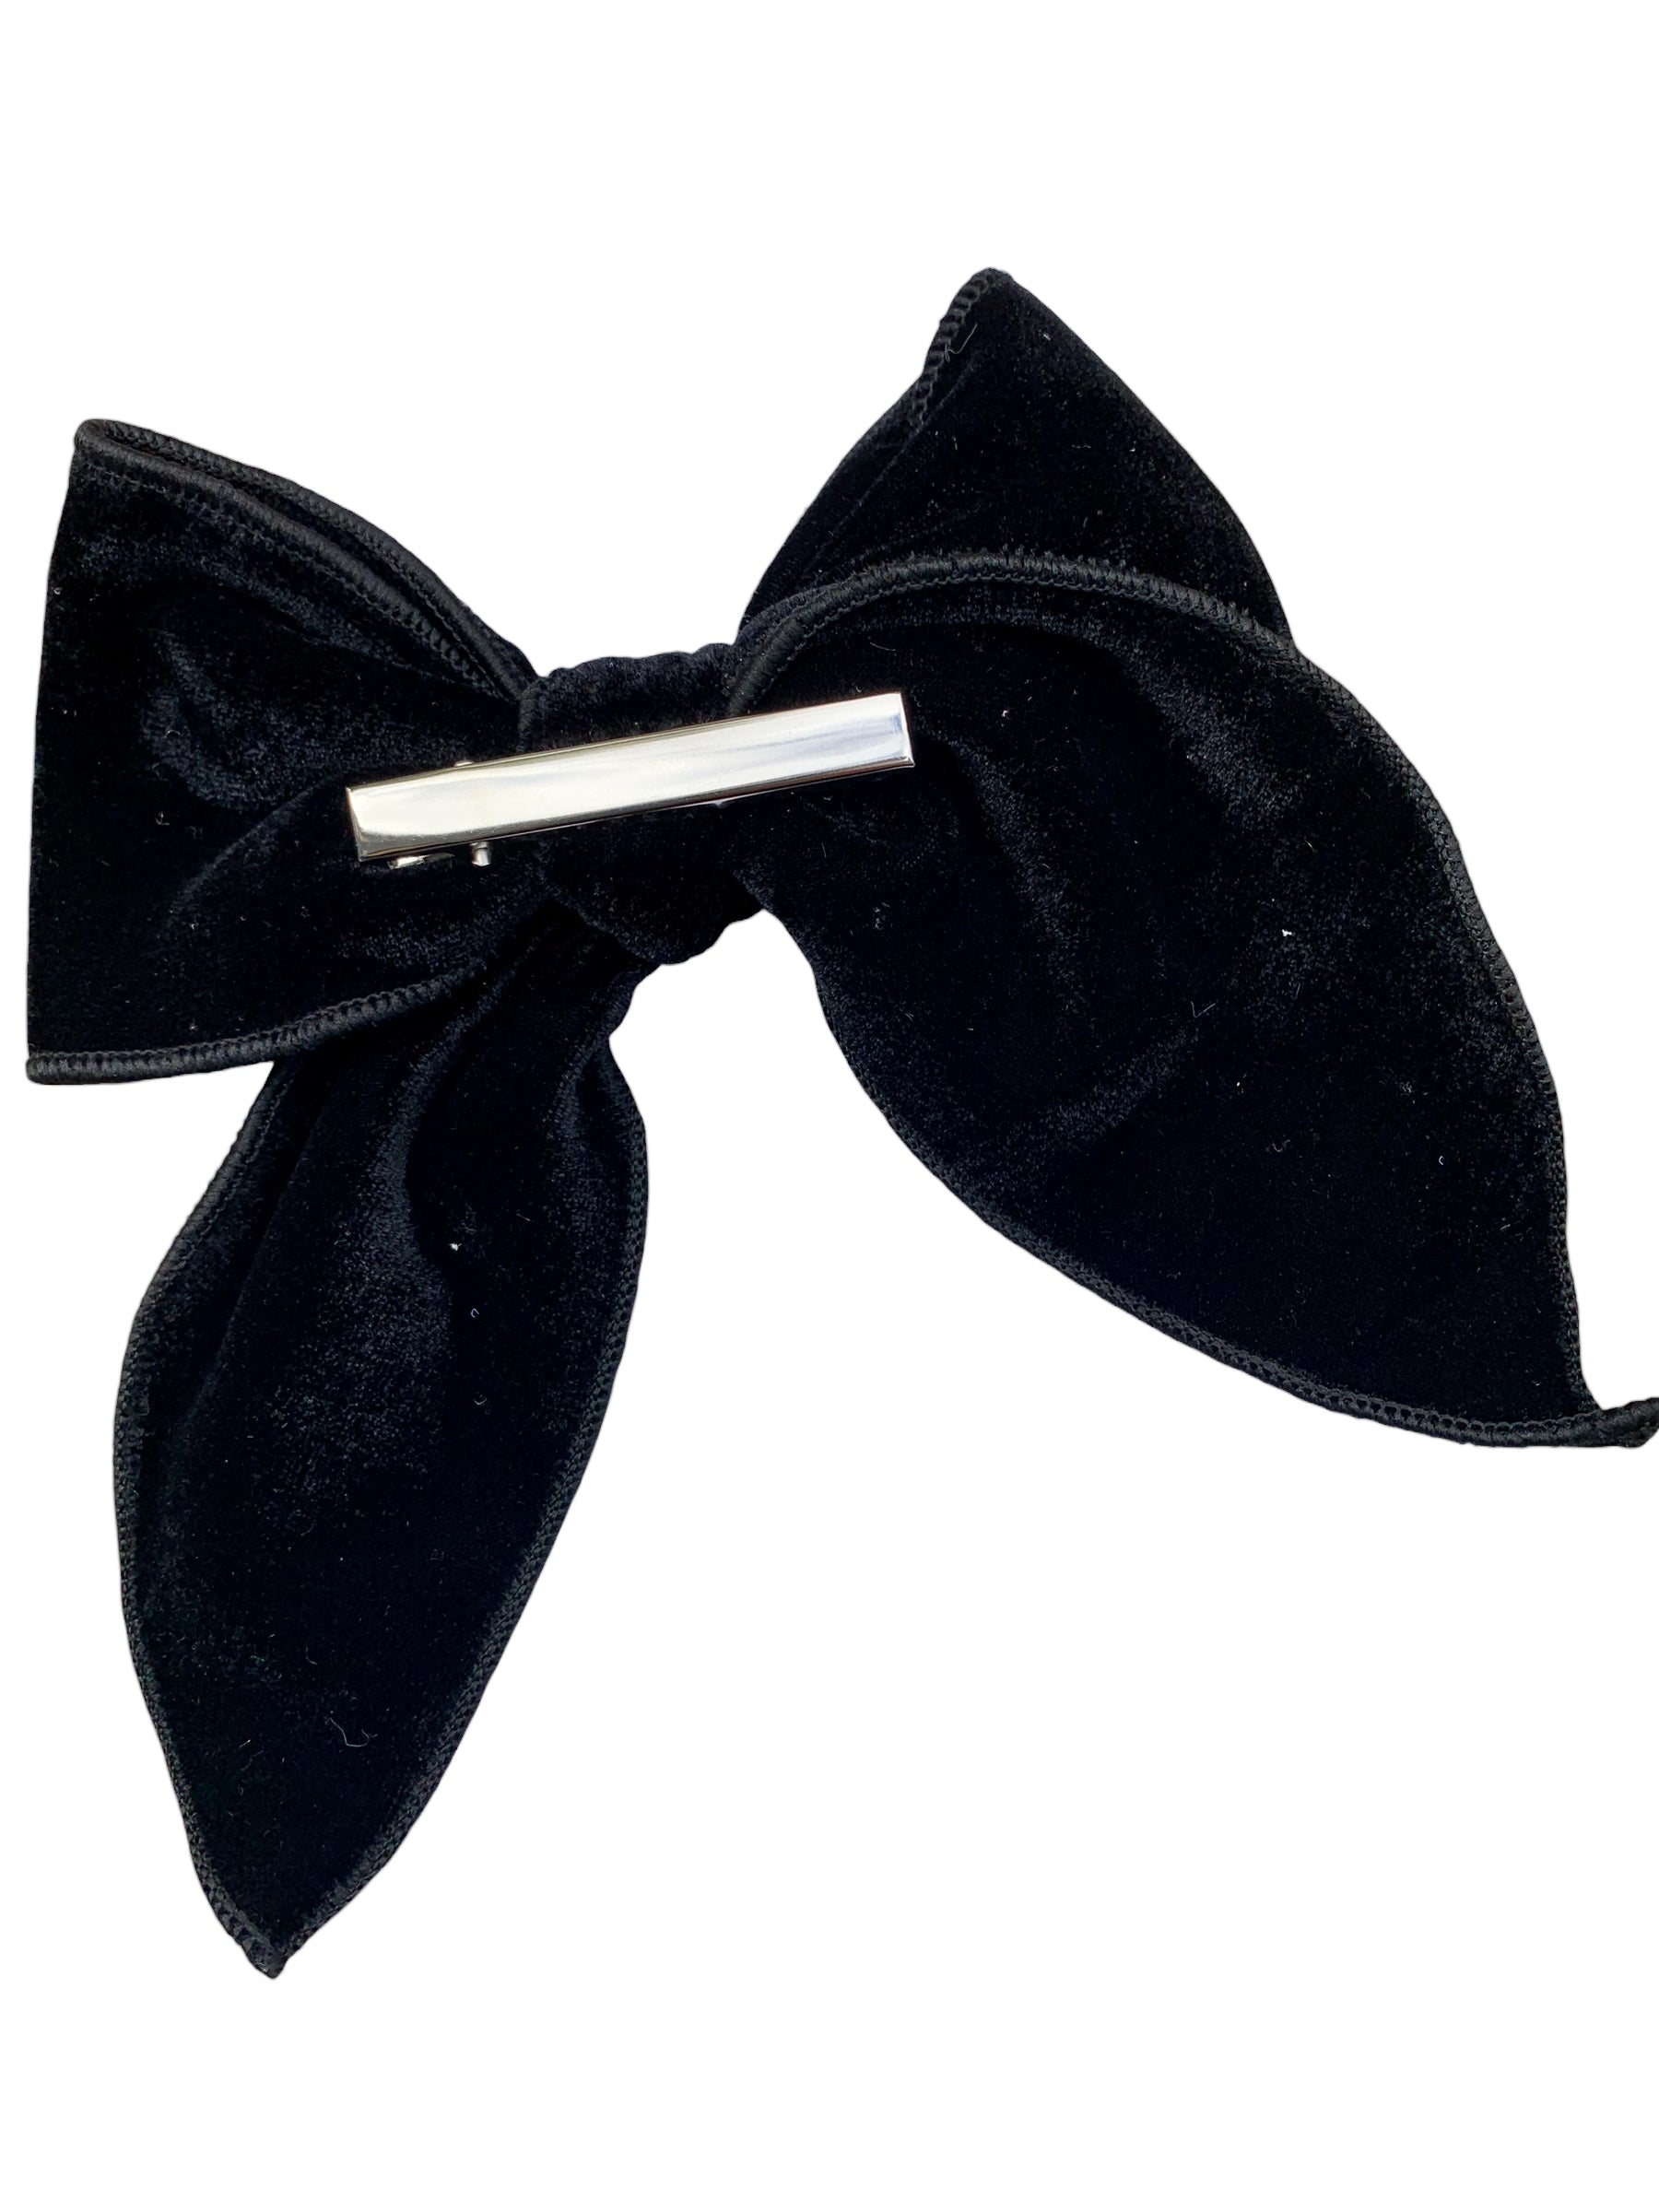 Happy Housewife Designs Black Velvet Hair Bows Charlotte Bow - 6” Bow